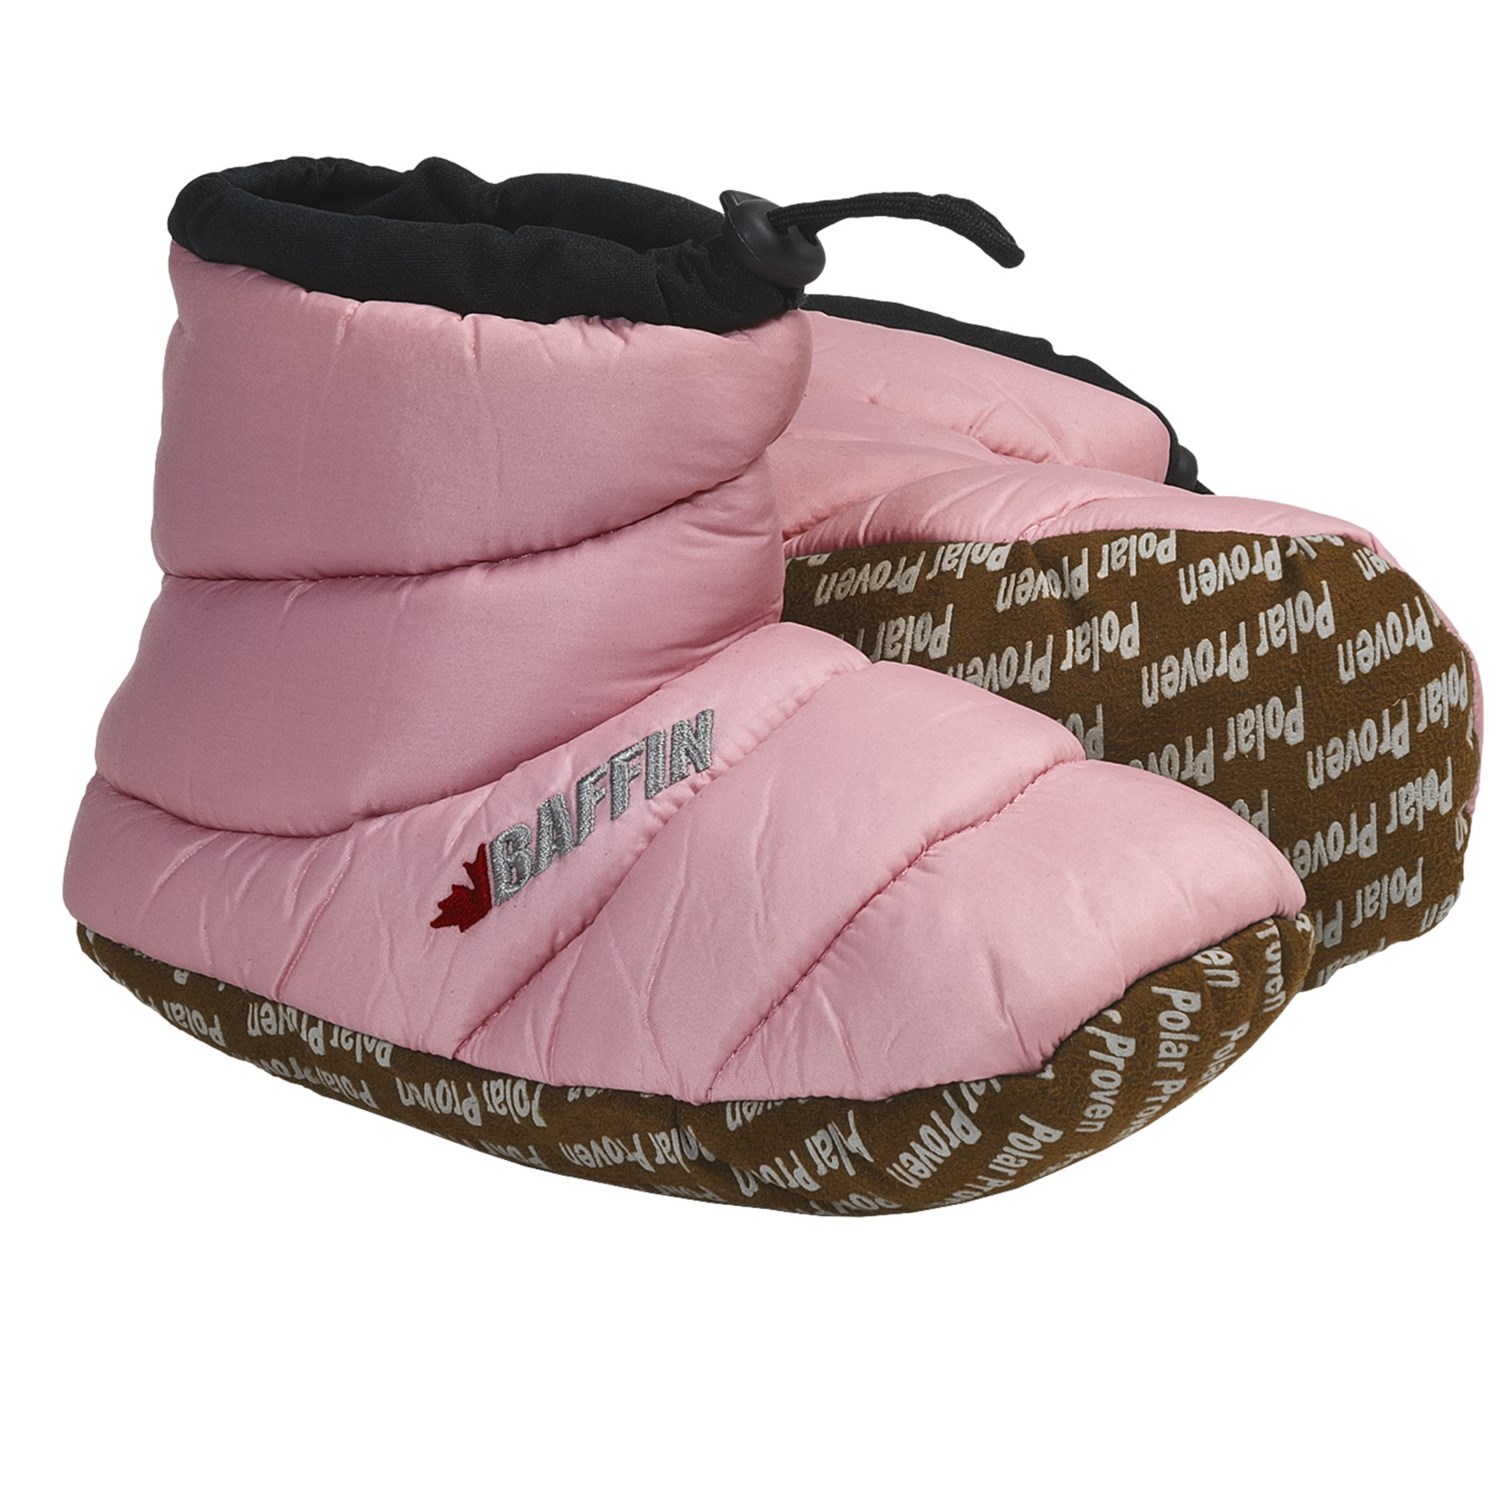 Baffin Cush Bootie Slippers (For Women) 5669W - Save 41%